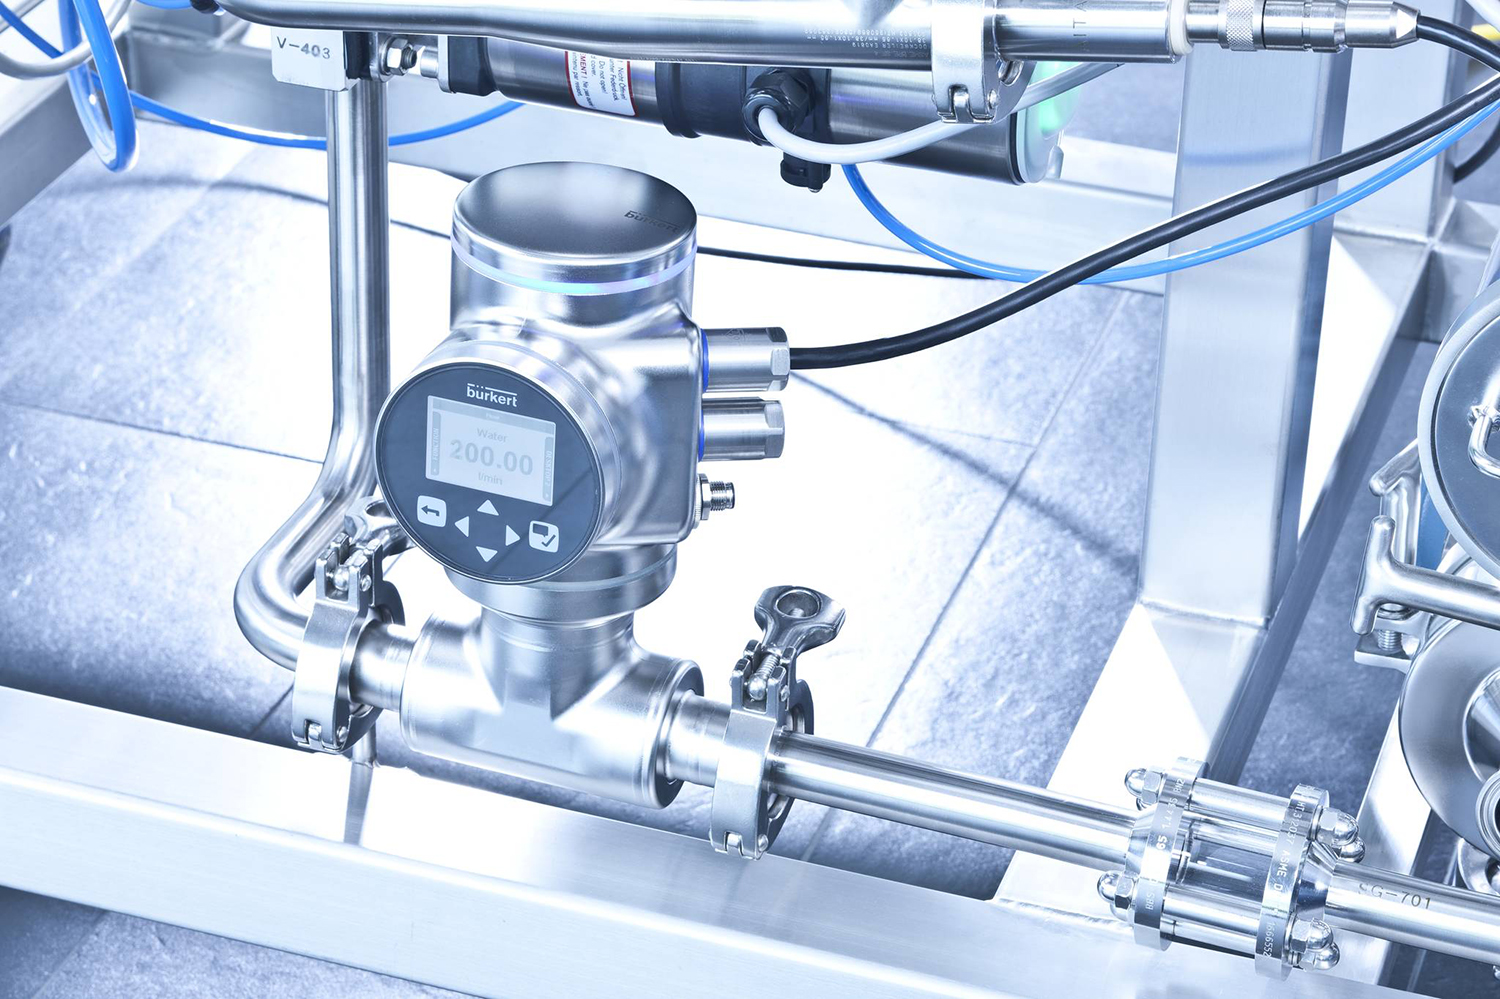 Constructed from 316L stainless steel, this prevents corrosion of the flow meter and the bacteria that can develop within it. The smooth, polished design also conforms with the highest grades of pharmaceutical standards.